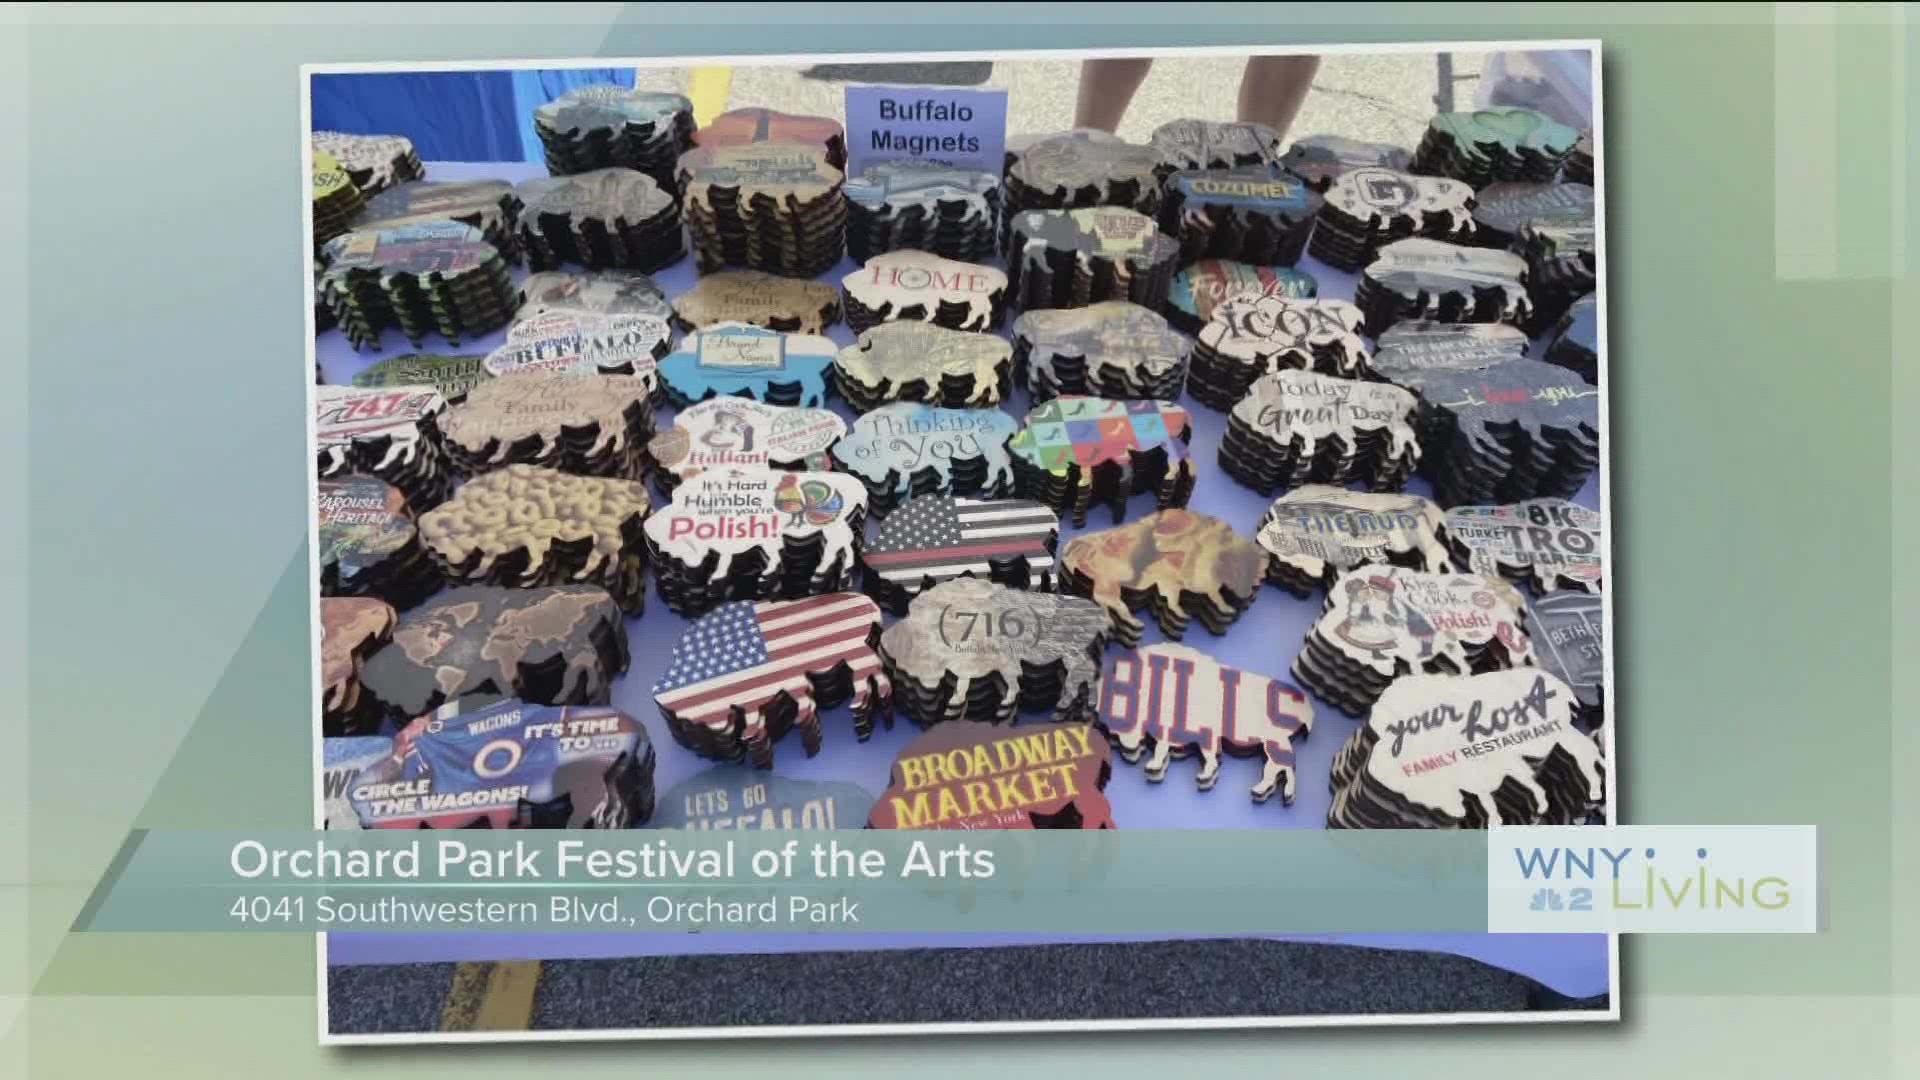 WNY Living - September 10 - Orchard Park Festival of the Arts (THIS VIDEO IS SPONSORED BY ORCHARD PARK FESTIVAL OF THE ARTS)